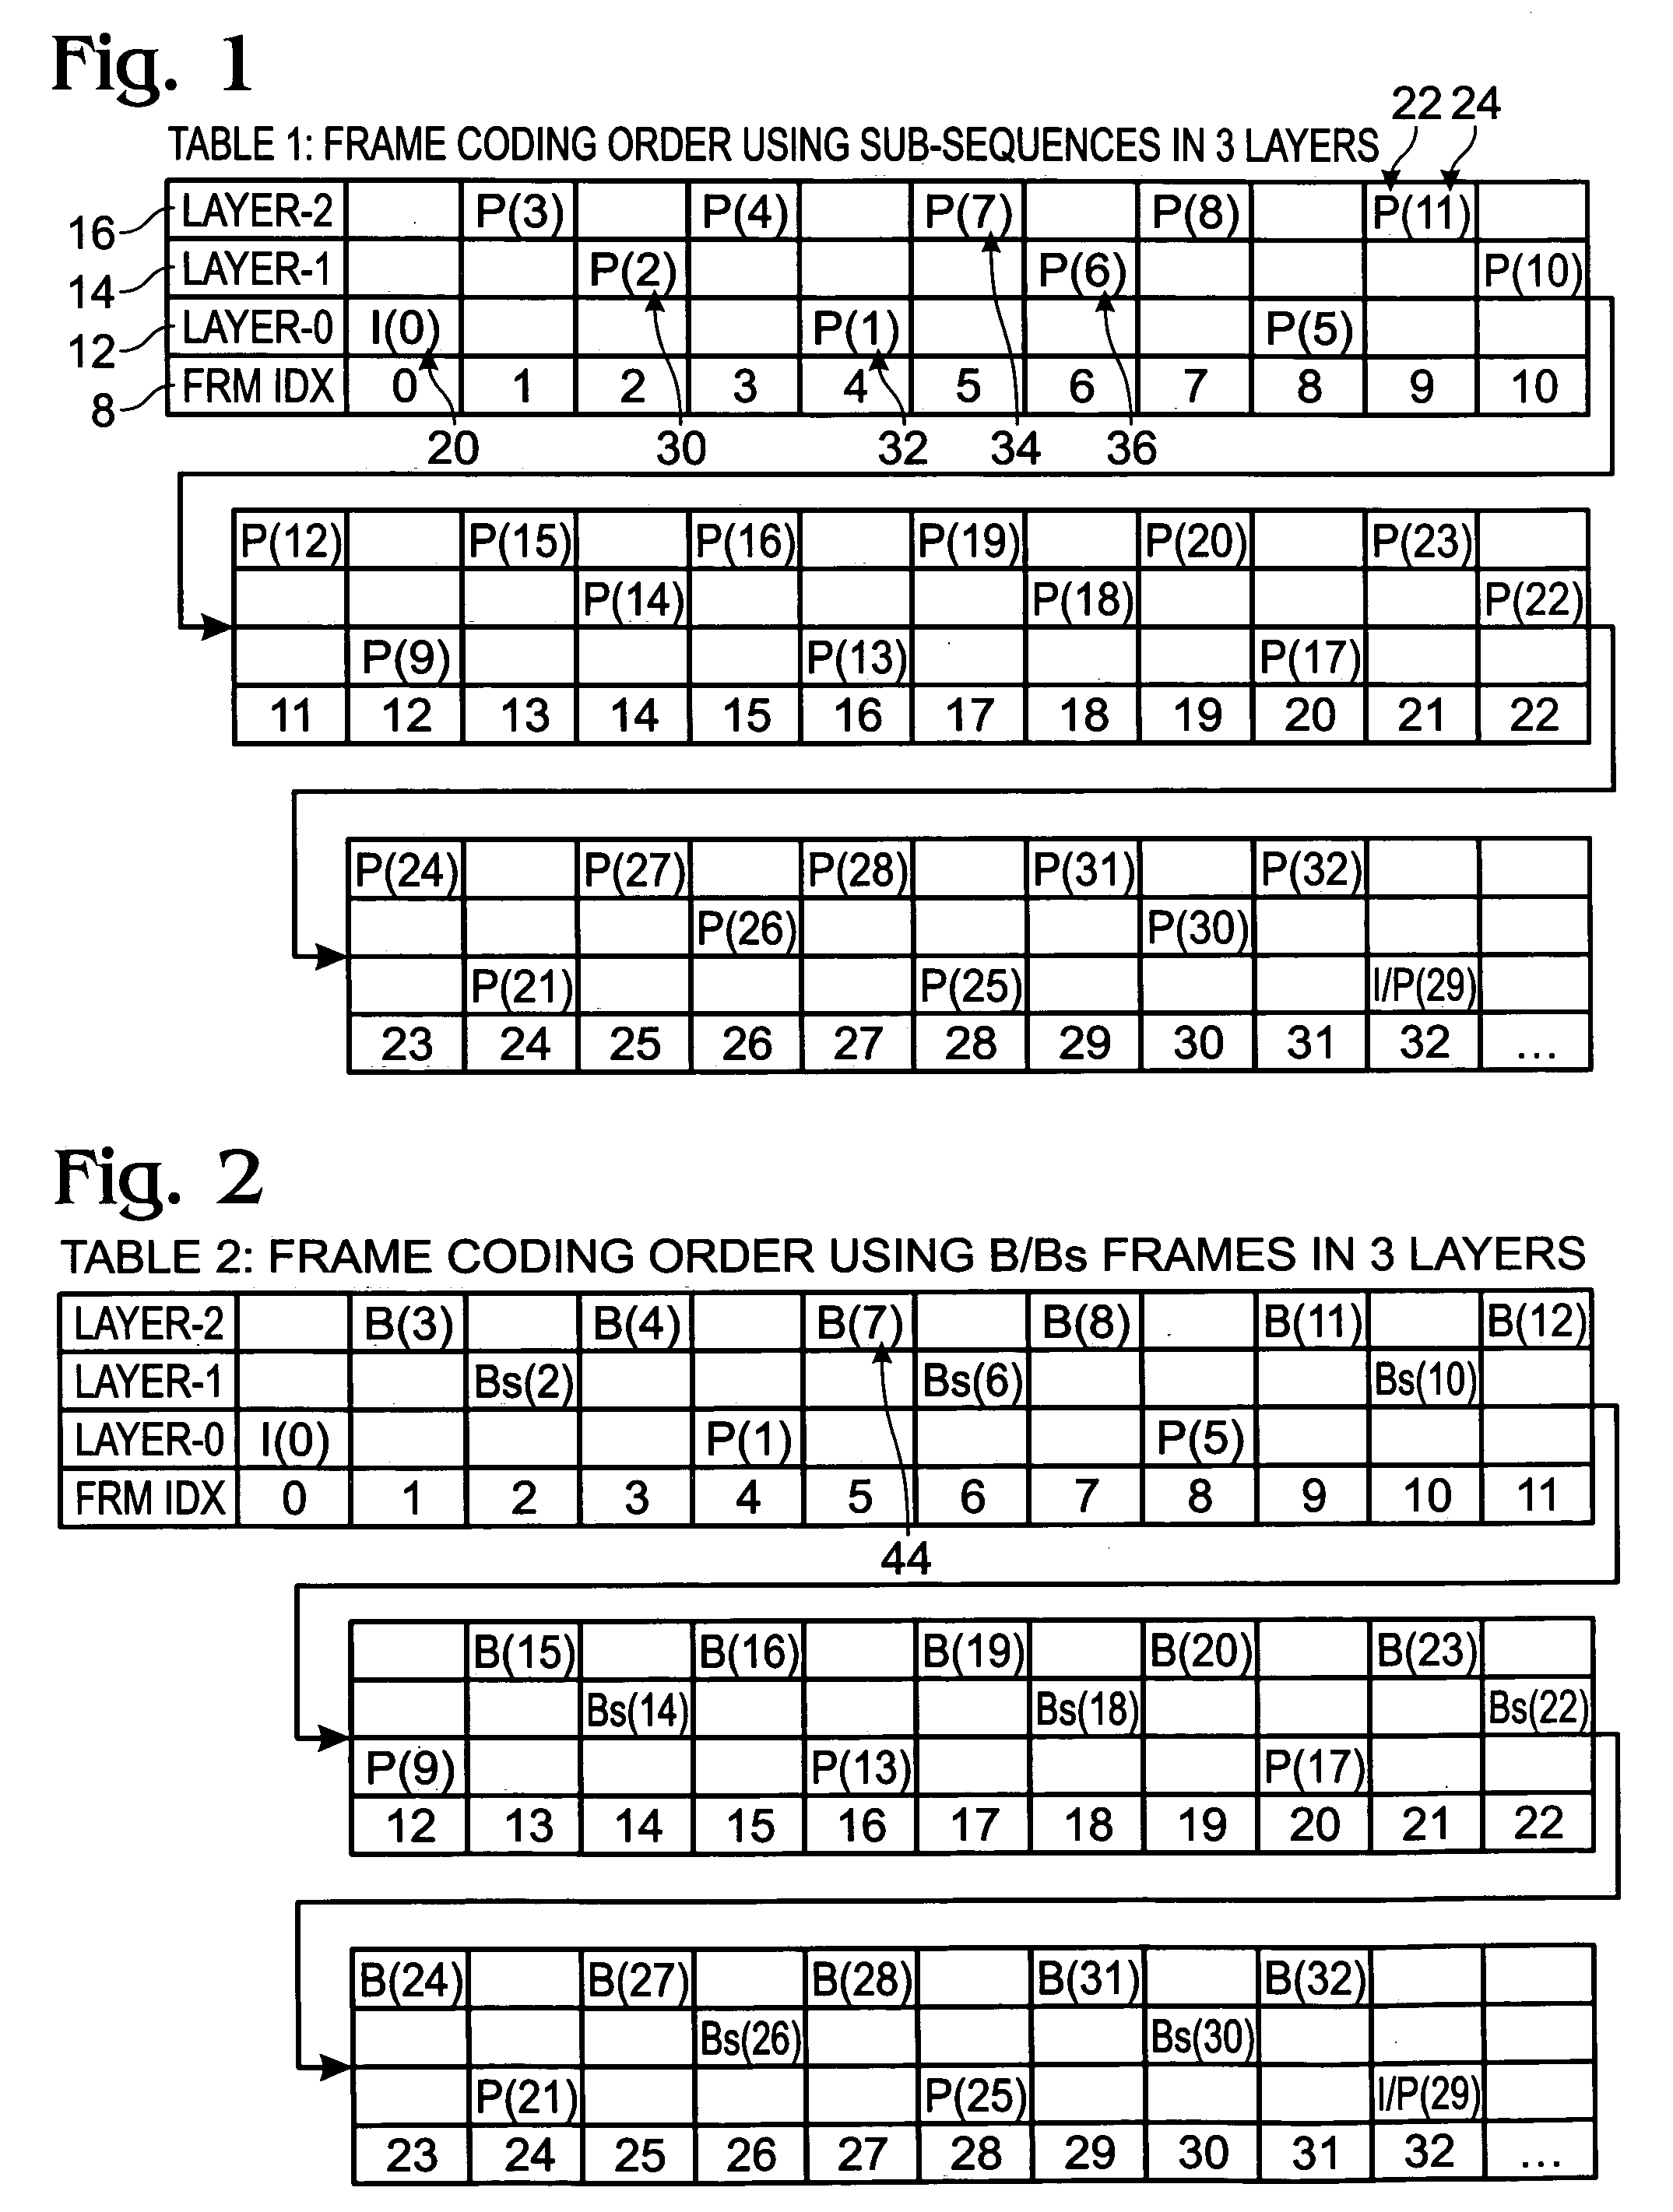 Temporal scalable coding using AVC coding tools